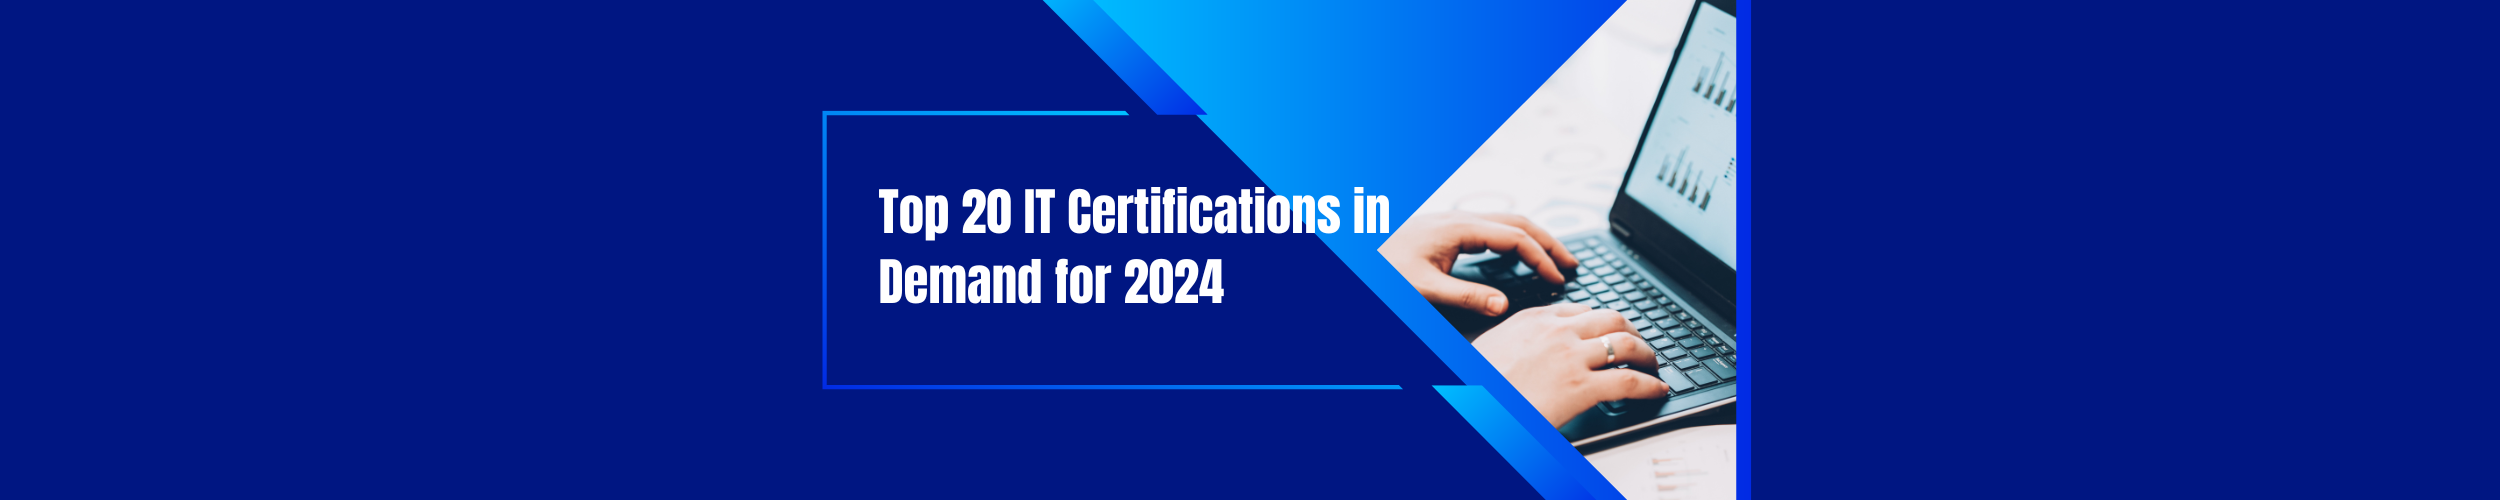 Top 20 IT Certifications in Demand for 2024